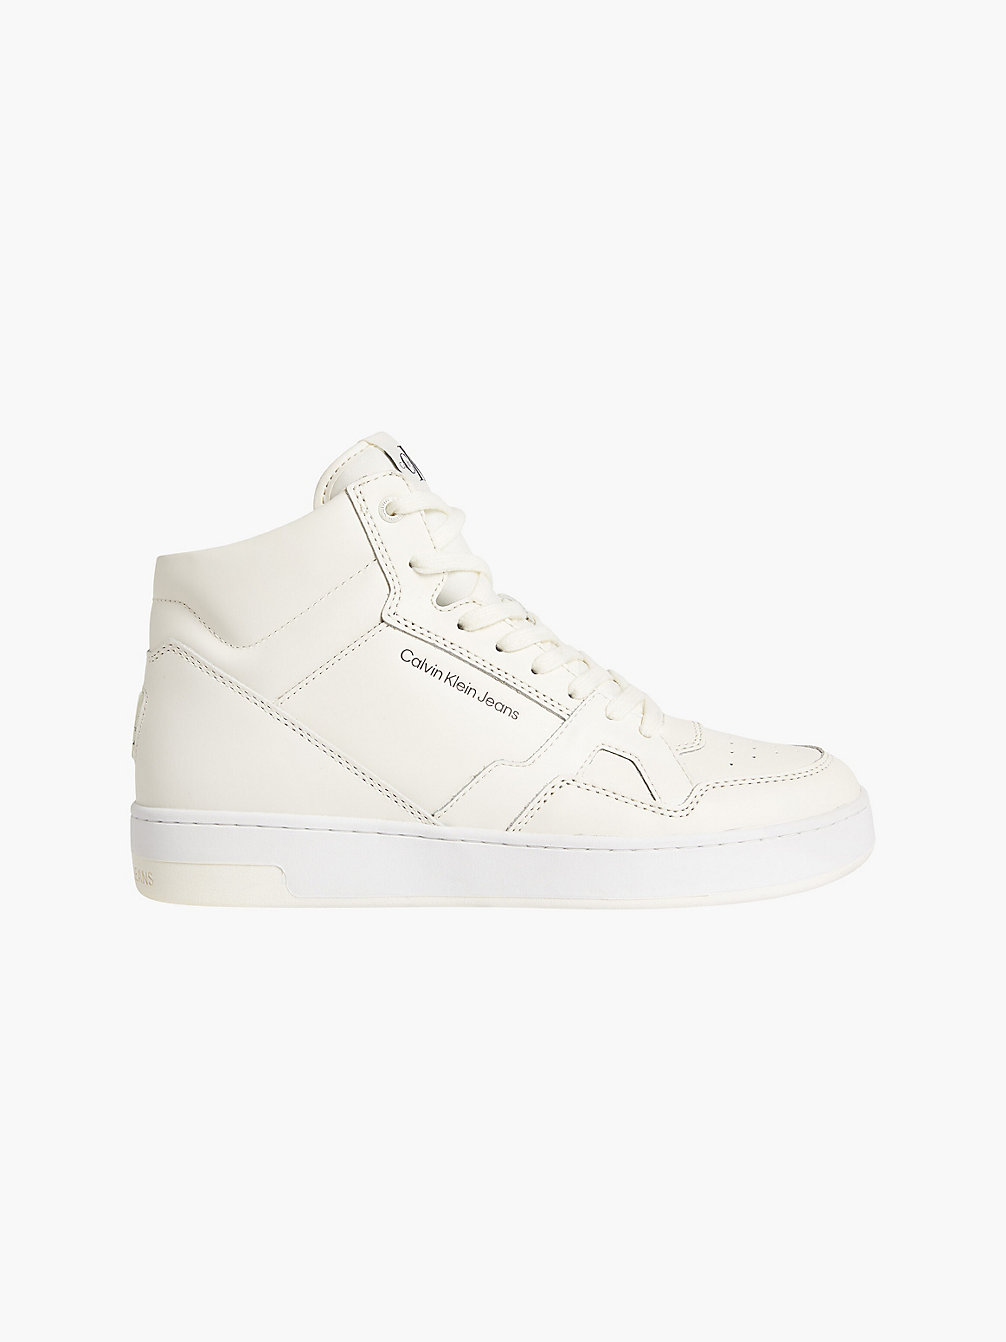 OFF WHITE Leather High-Top Trainers undefined men Calvin Klein